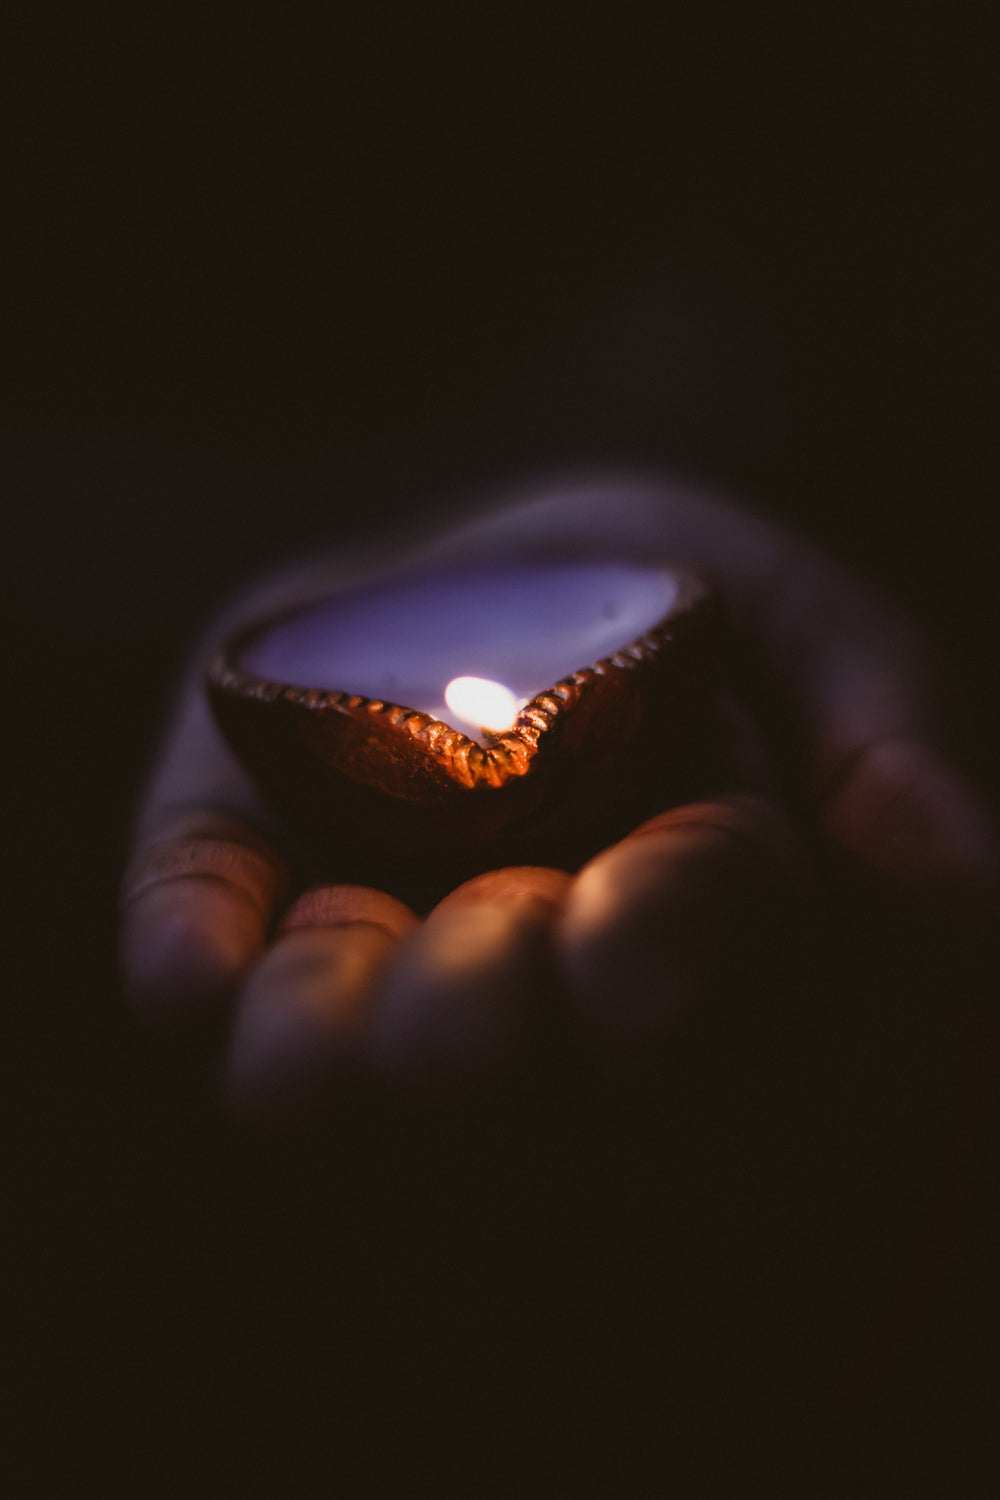 diwali candle lies in the palm of a hand